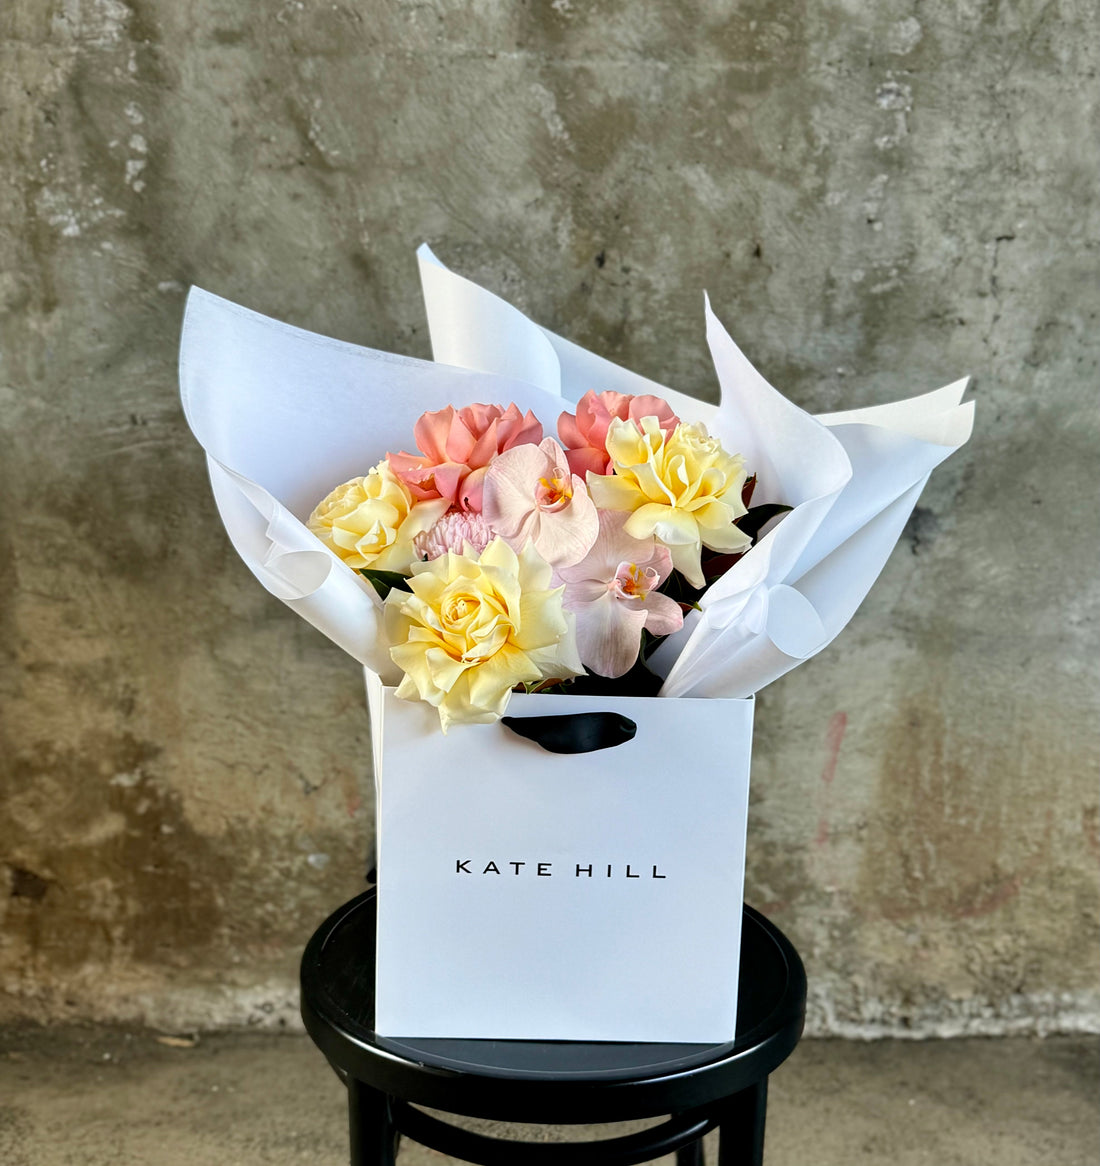 Close up image of A medium sized lemon and blush guft bouquet in kate hill flower bag, sitting on a black bentwood chair in front of a concrete wall.